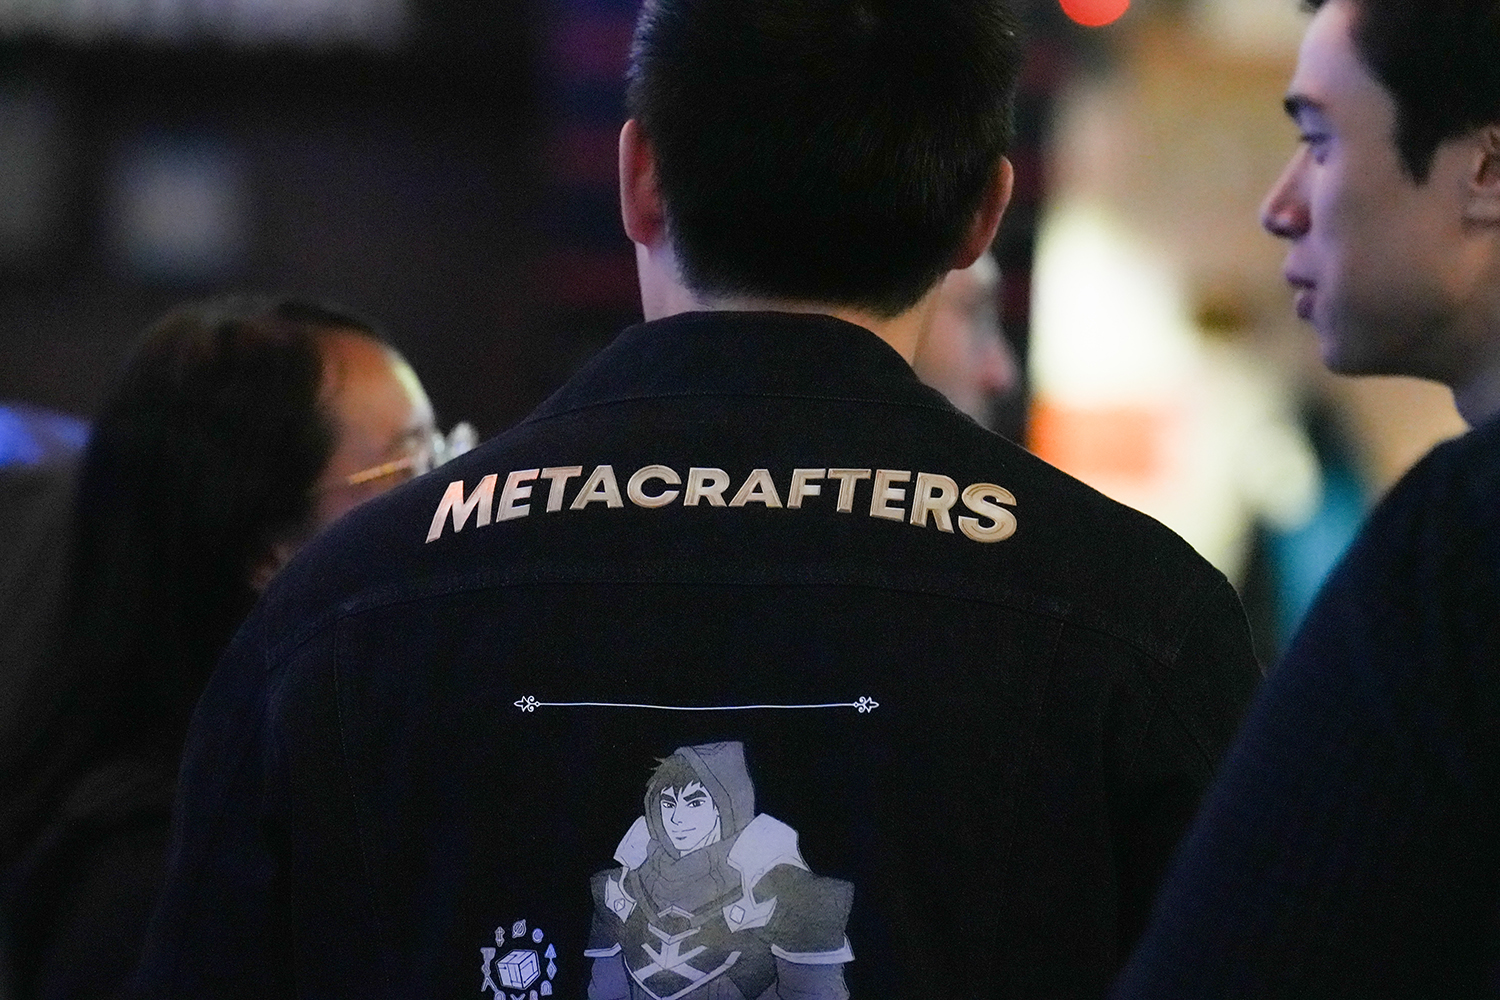 guy with a metacrafters jacket on